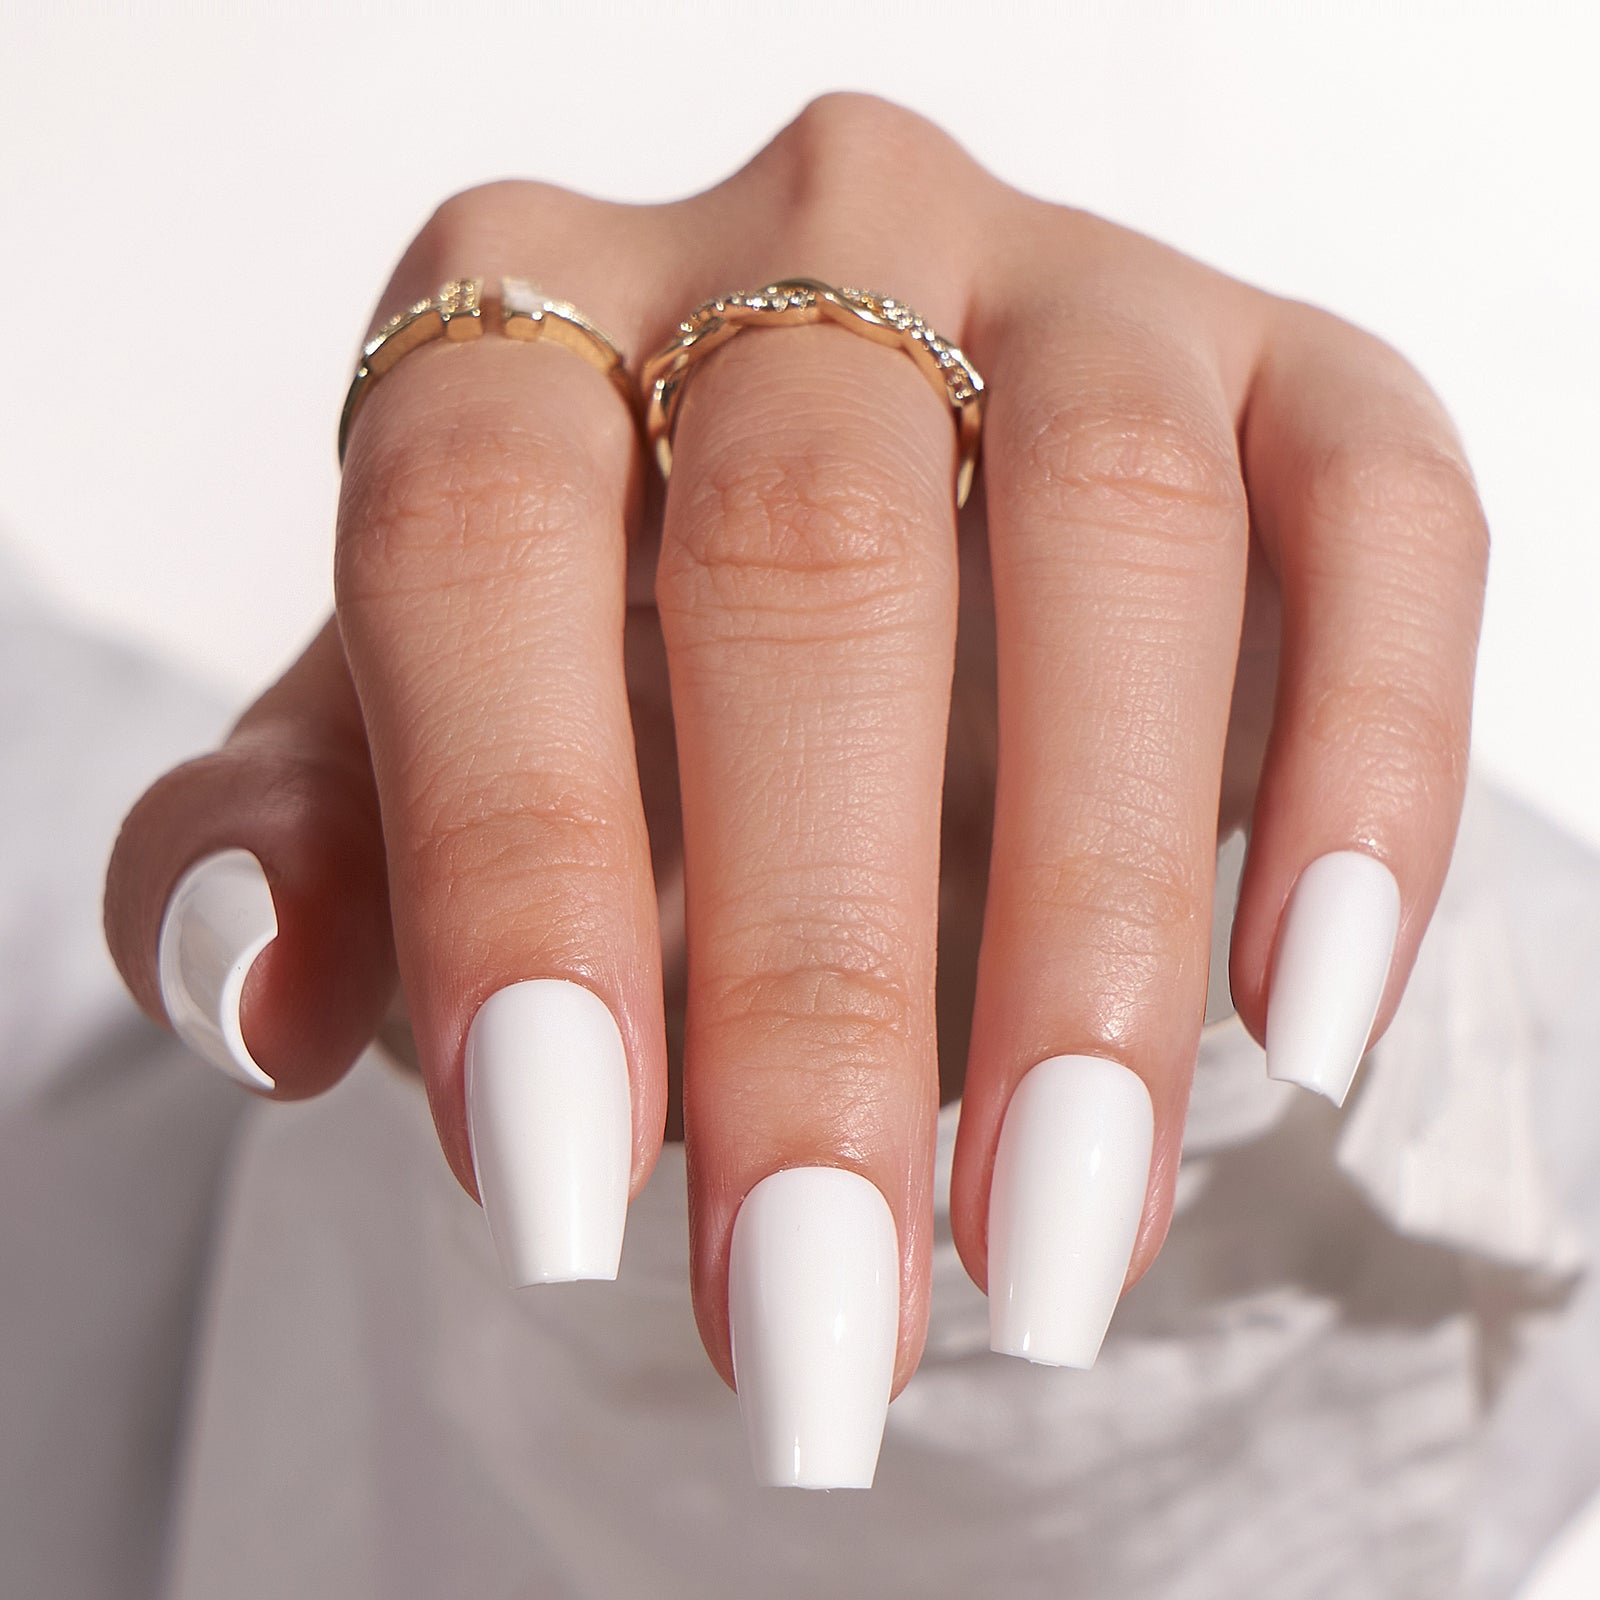 Faux-ongles blanc